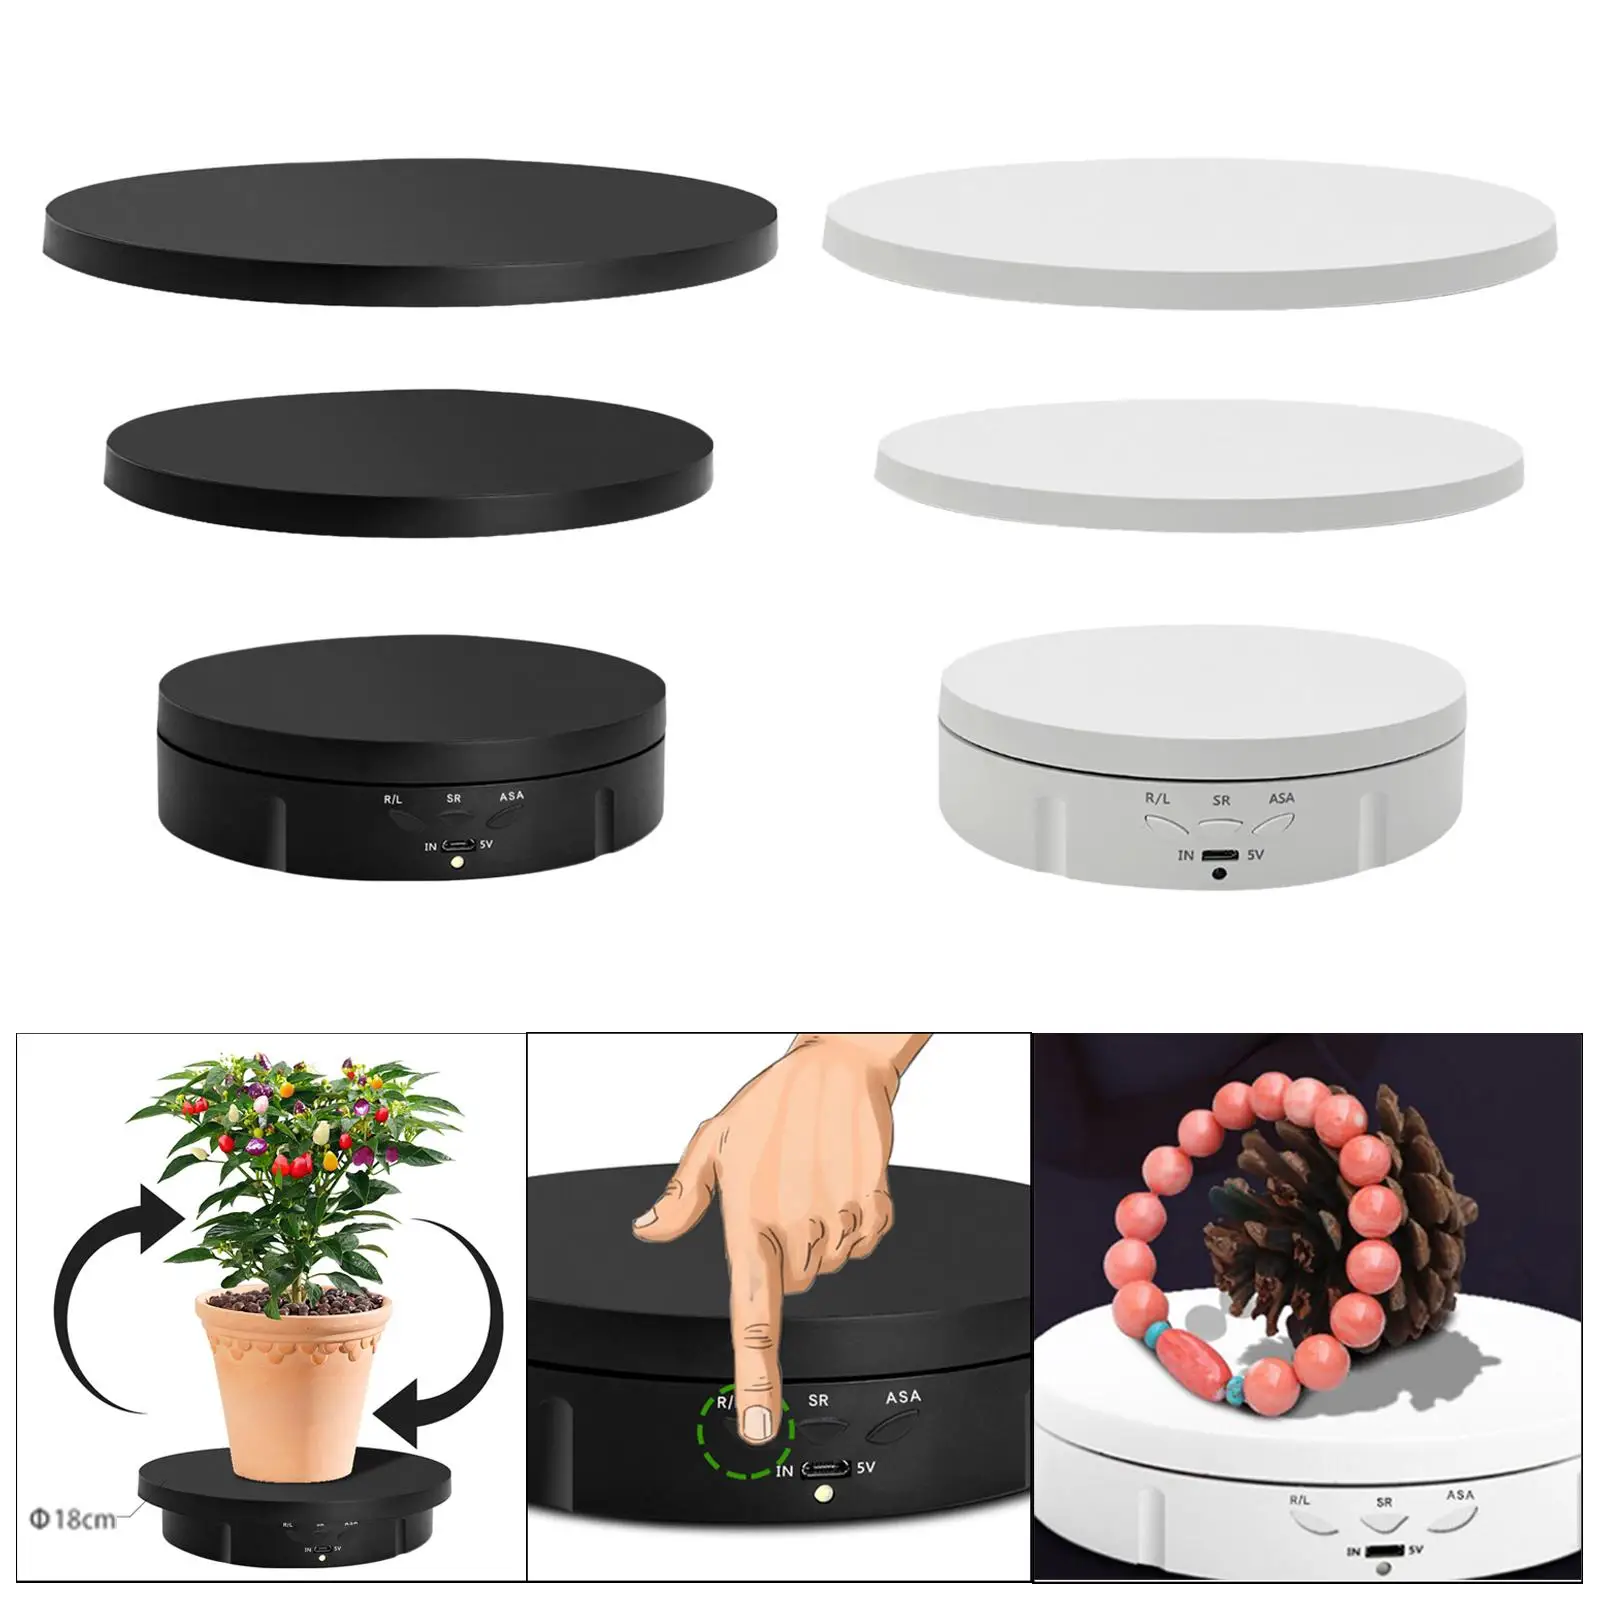 Motorized Rotating Display Stand Multifunctional Rotating Plate 3 Sizes Replacements for Jewelry Cake Photography Products Shows